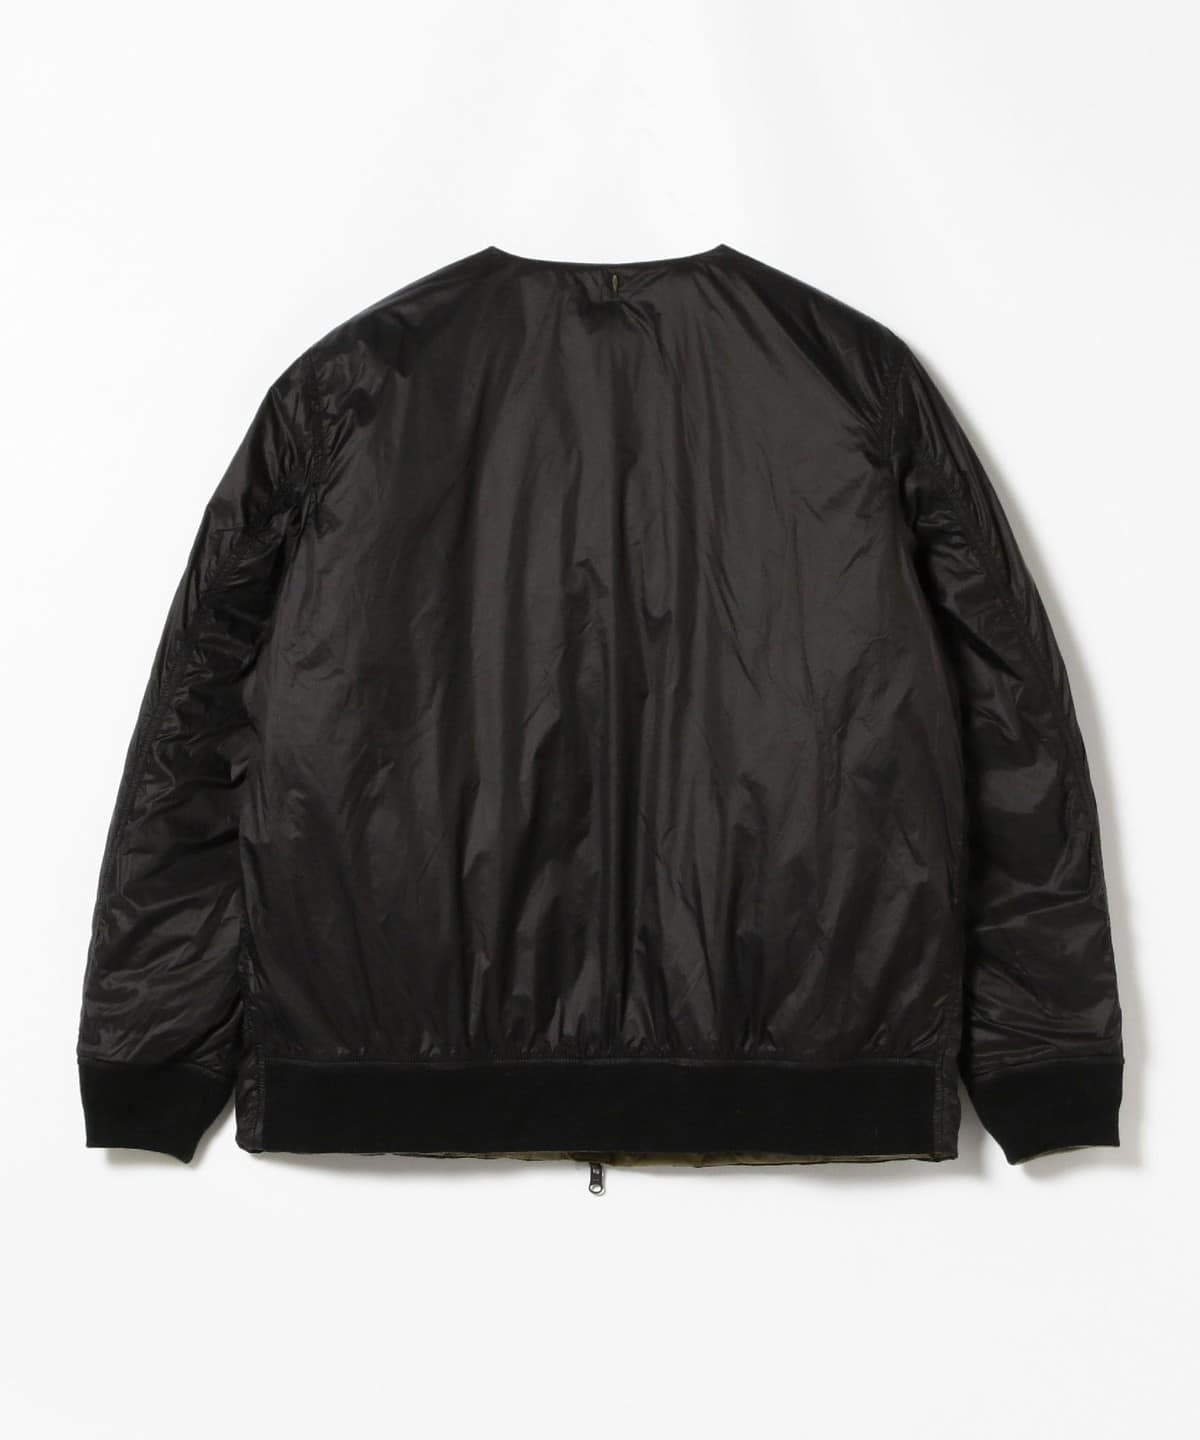 Taion x Beams Reversible MA-1 Type Inner Jacket